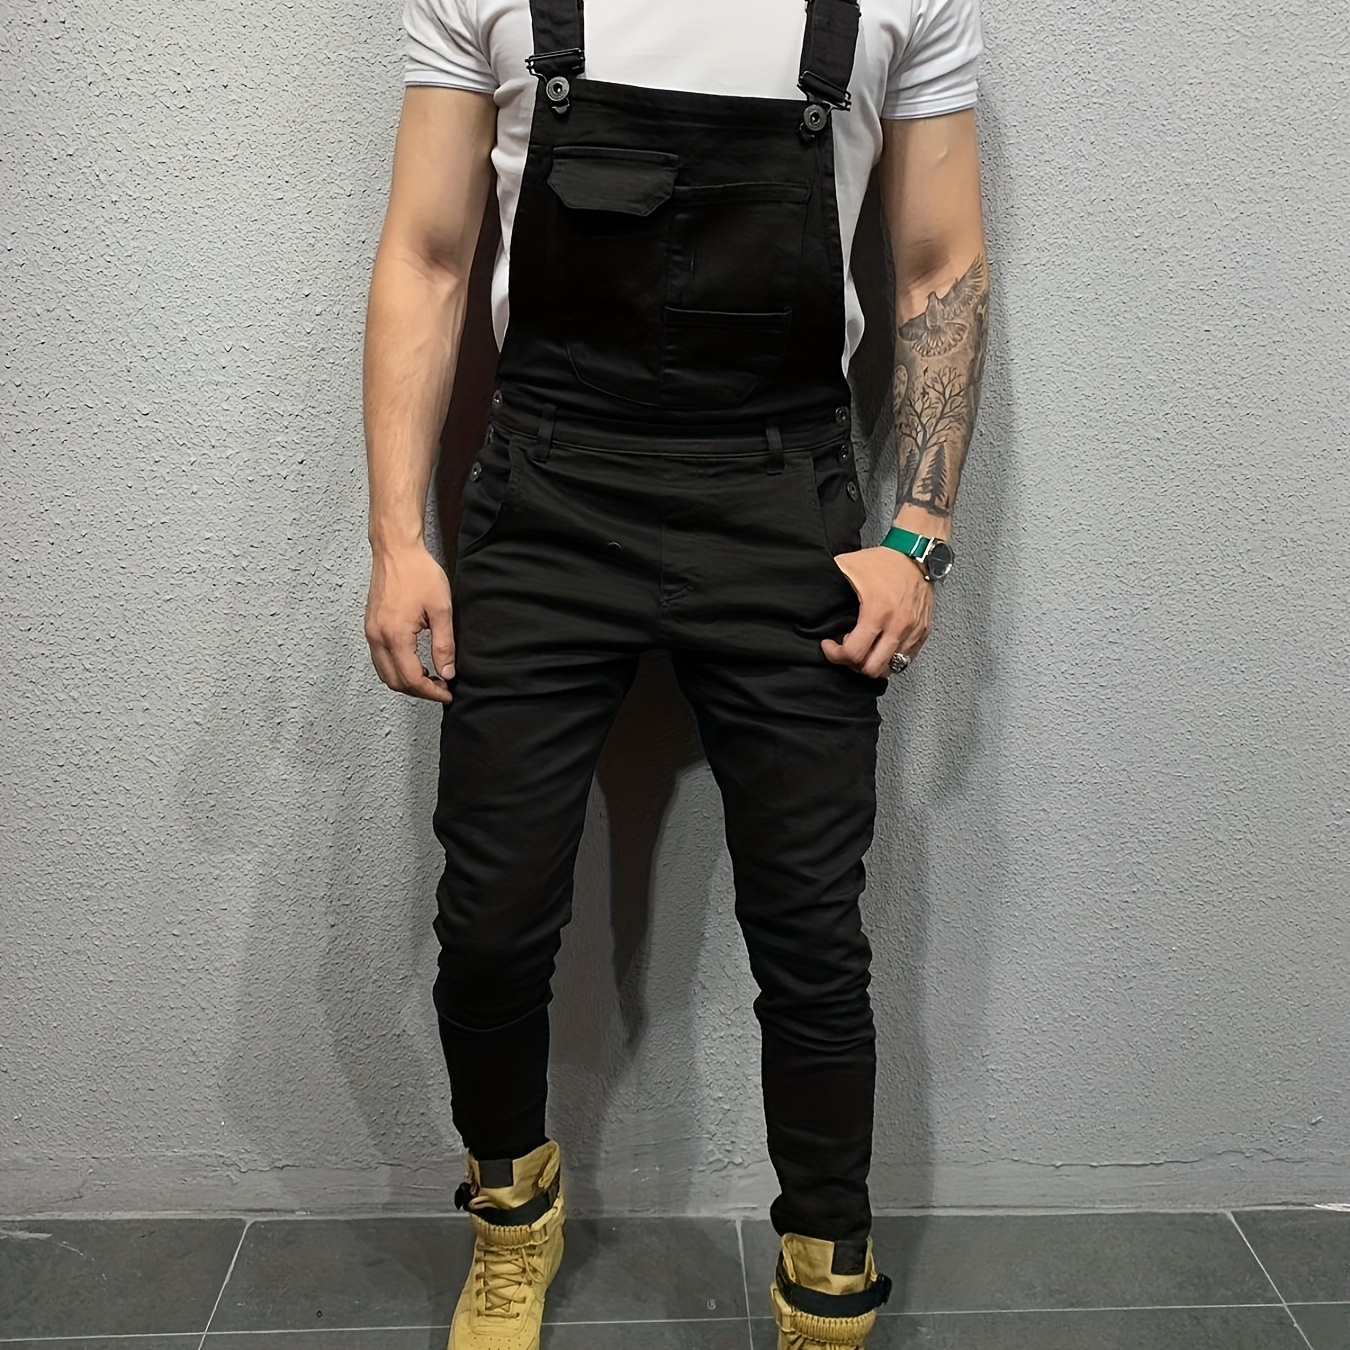 

Men's Fashion Denim Overalls, Slim Fit Casual Suspender Pants, Streetwear Style, Adjustable Strap Work Jeans, Tapered Leg Trousers